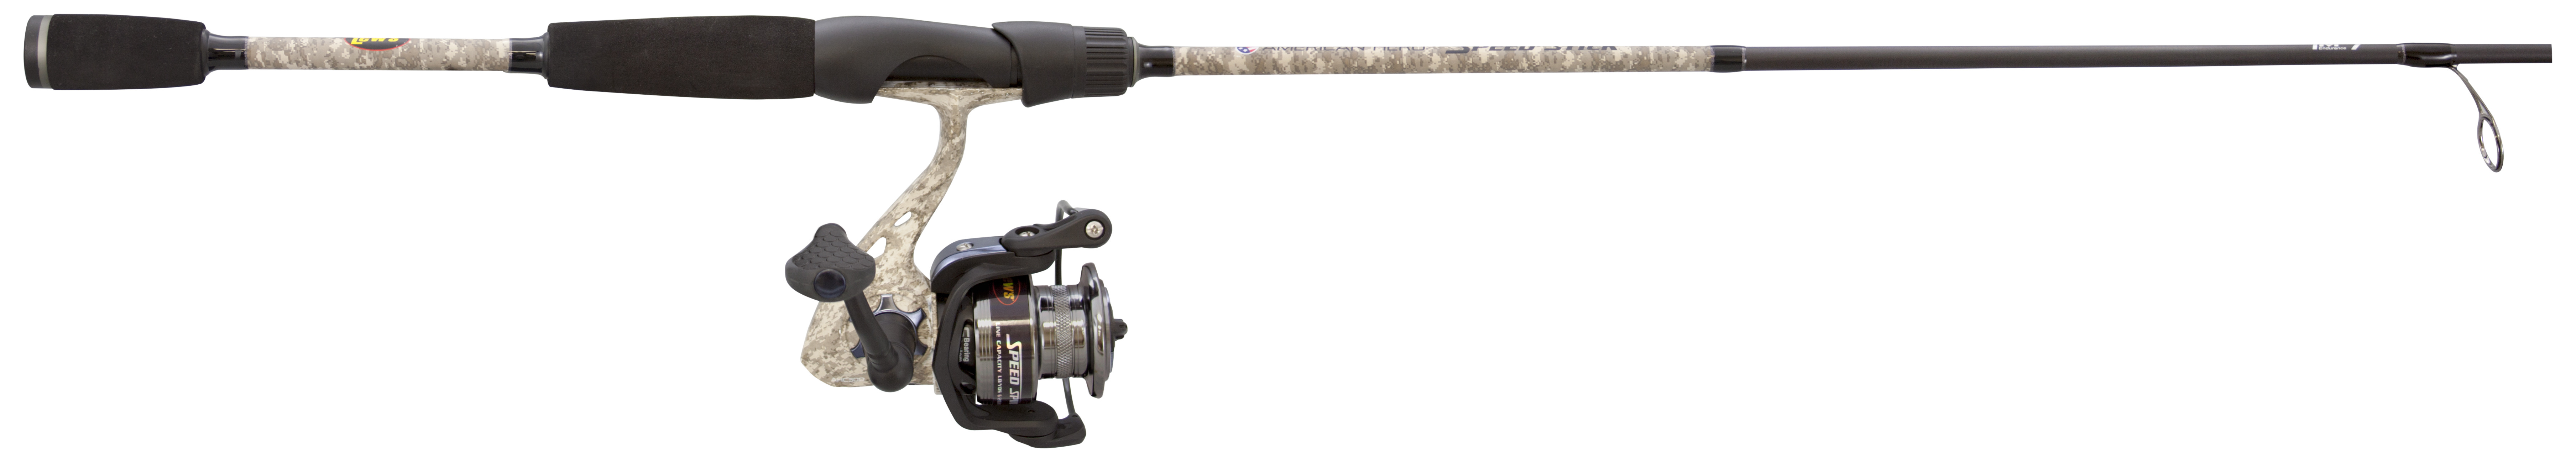 Lew's American Hero Camo Spinning Combo - AHC4070M2 for sale